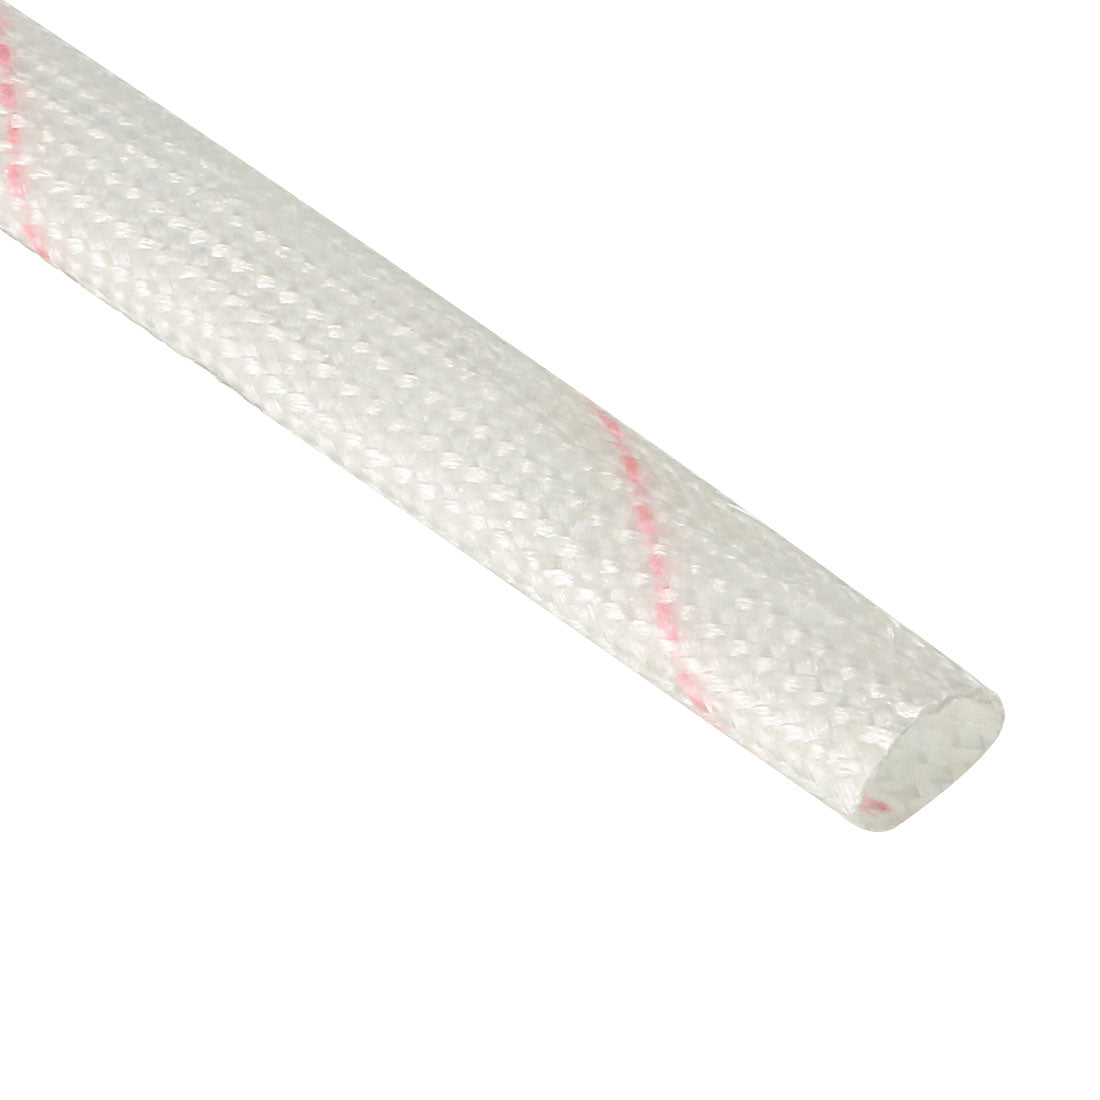 uxcell Uxcell Fiberglass Sleeve 5mm I.D. PVC Insulation Tubing 1500V Tube Adjustable Sleeving Pipe 125 Degree Centigrade Cable Wrap Wire 880mm 2.89ft White and Red